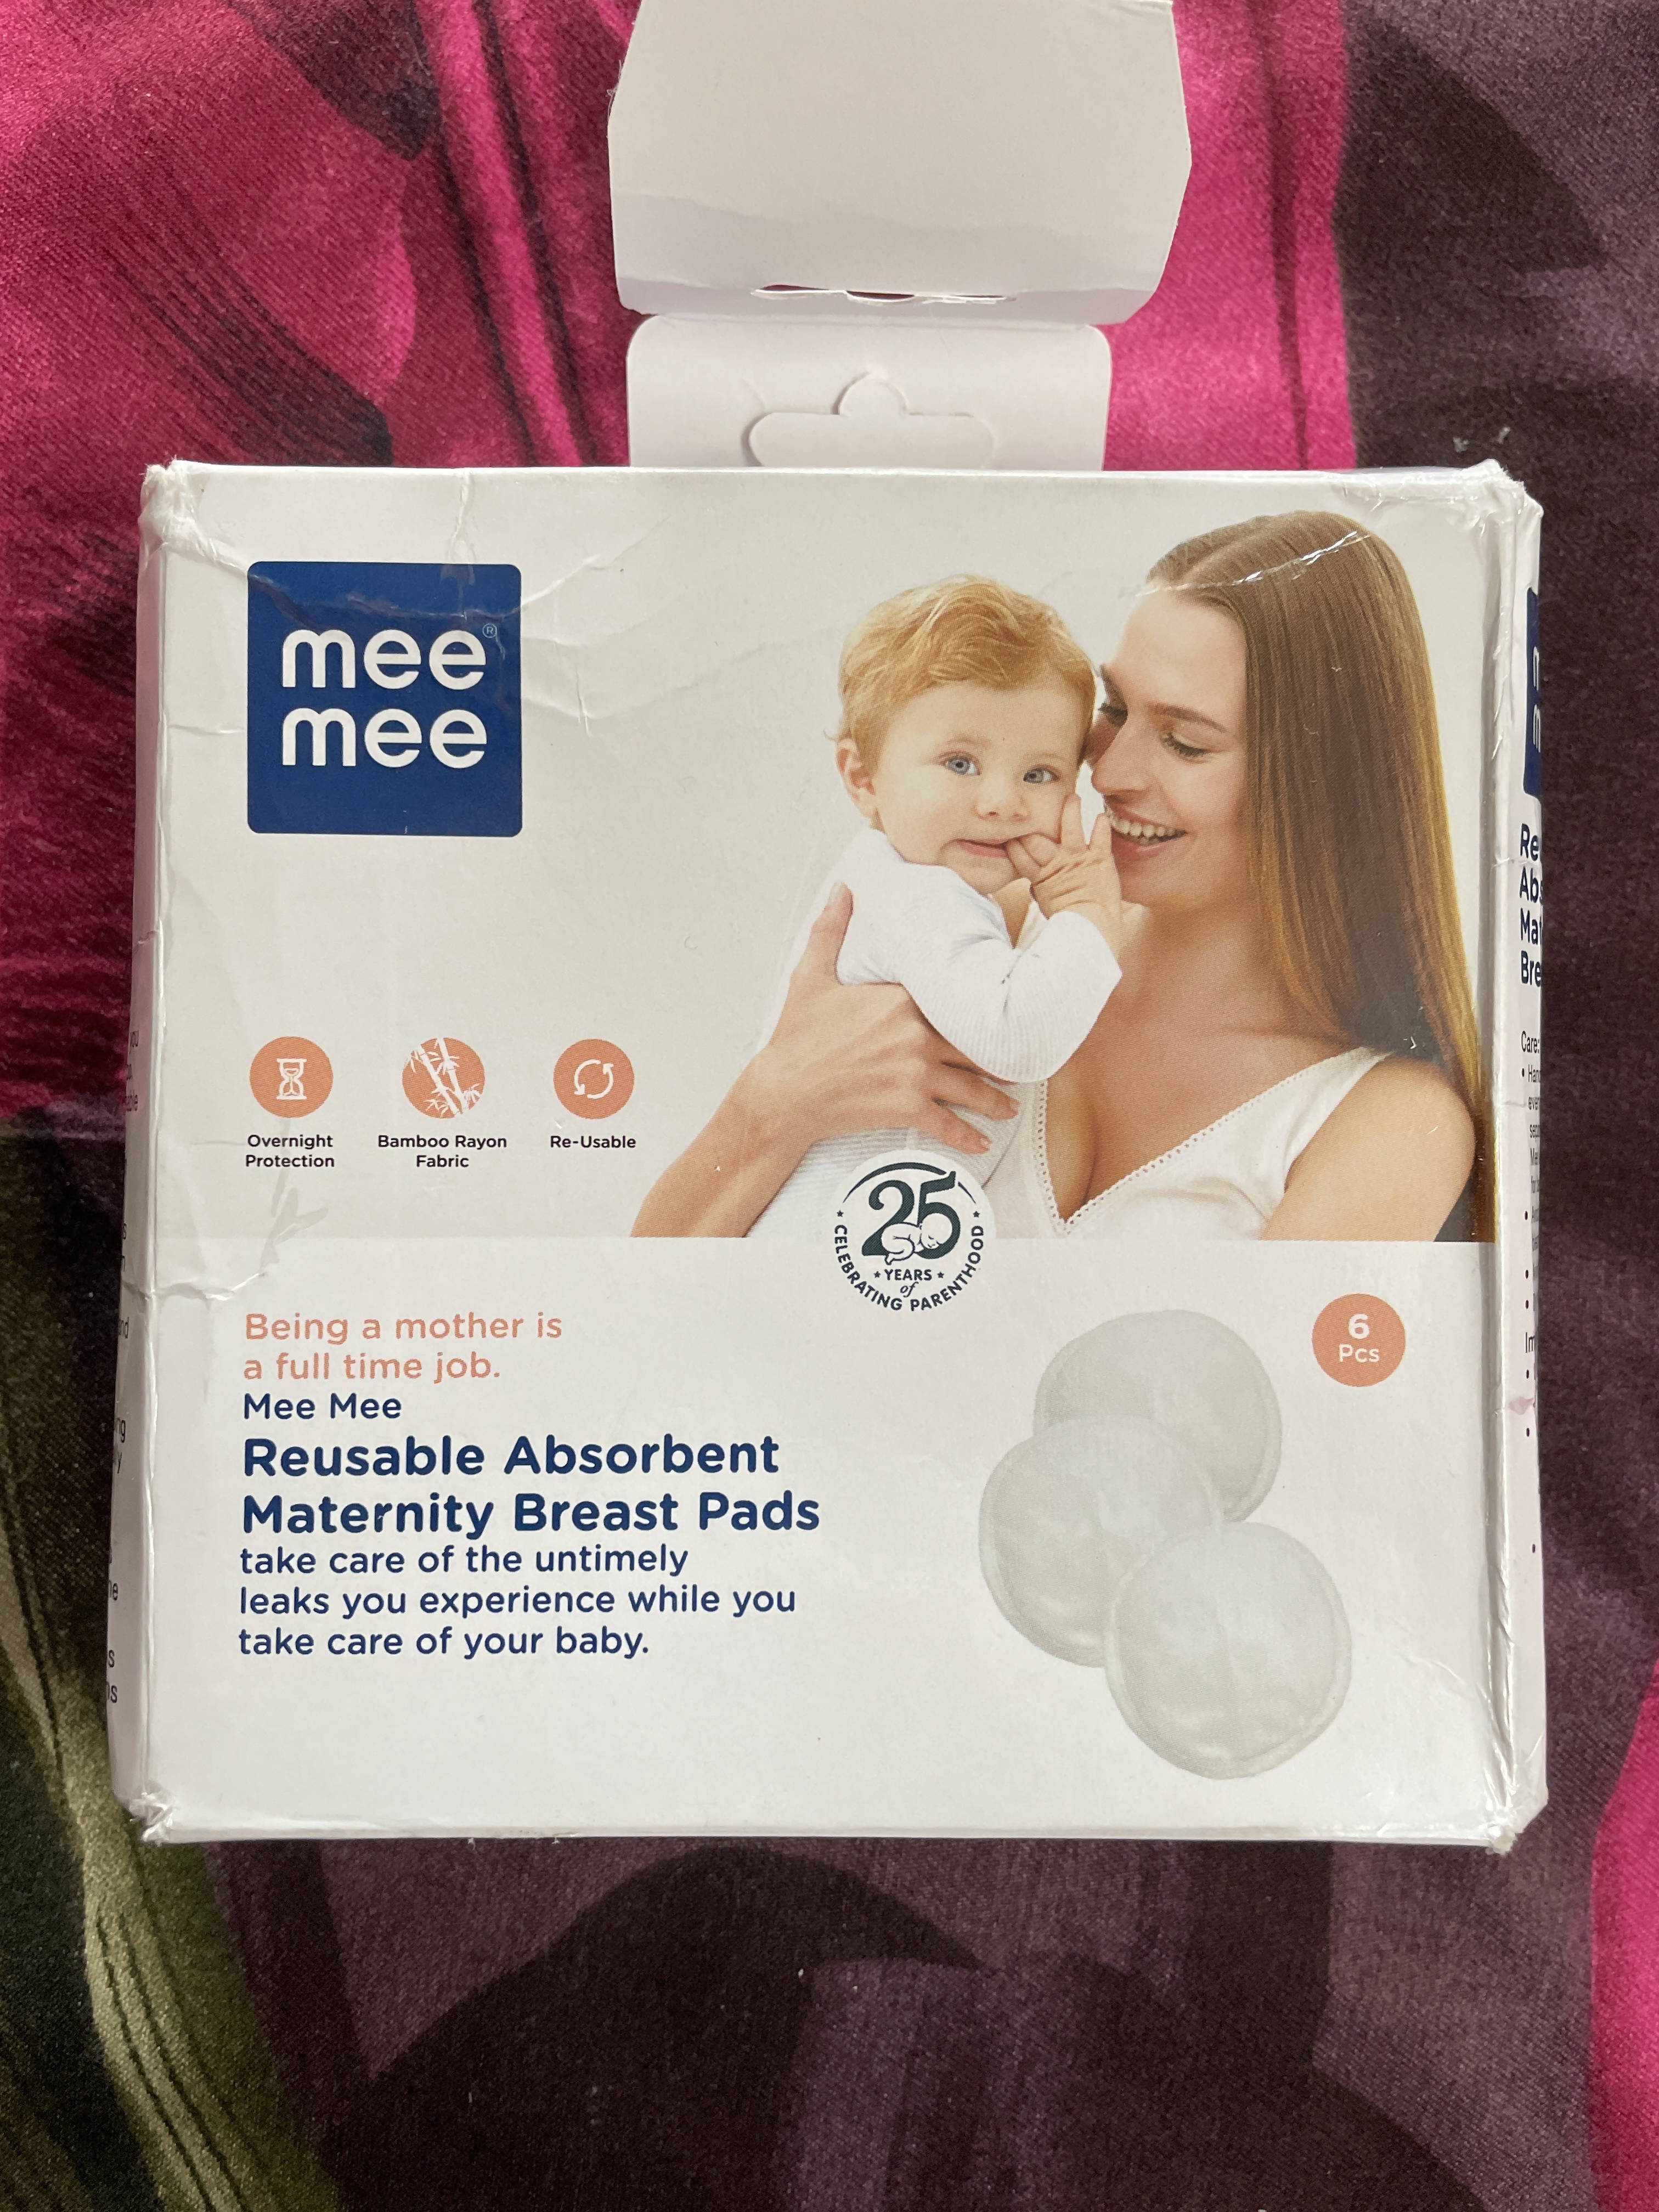 Mee mee reusable absorbent maternity breast pads